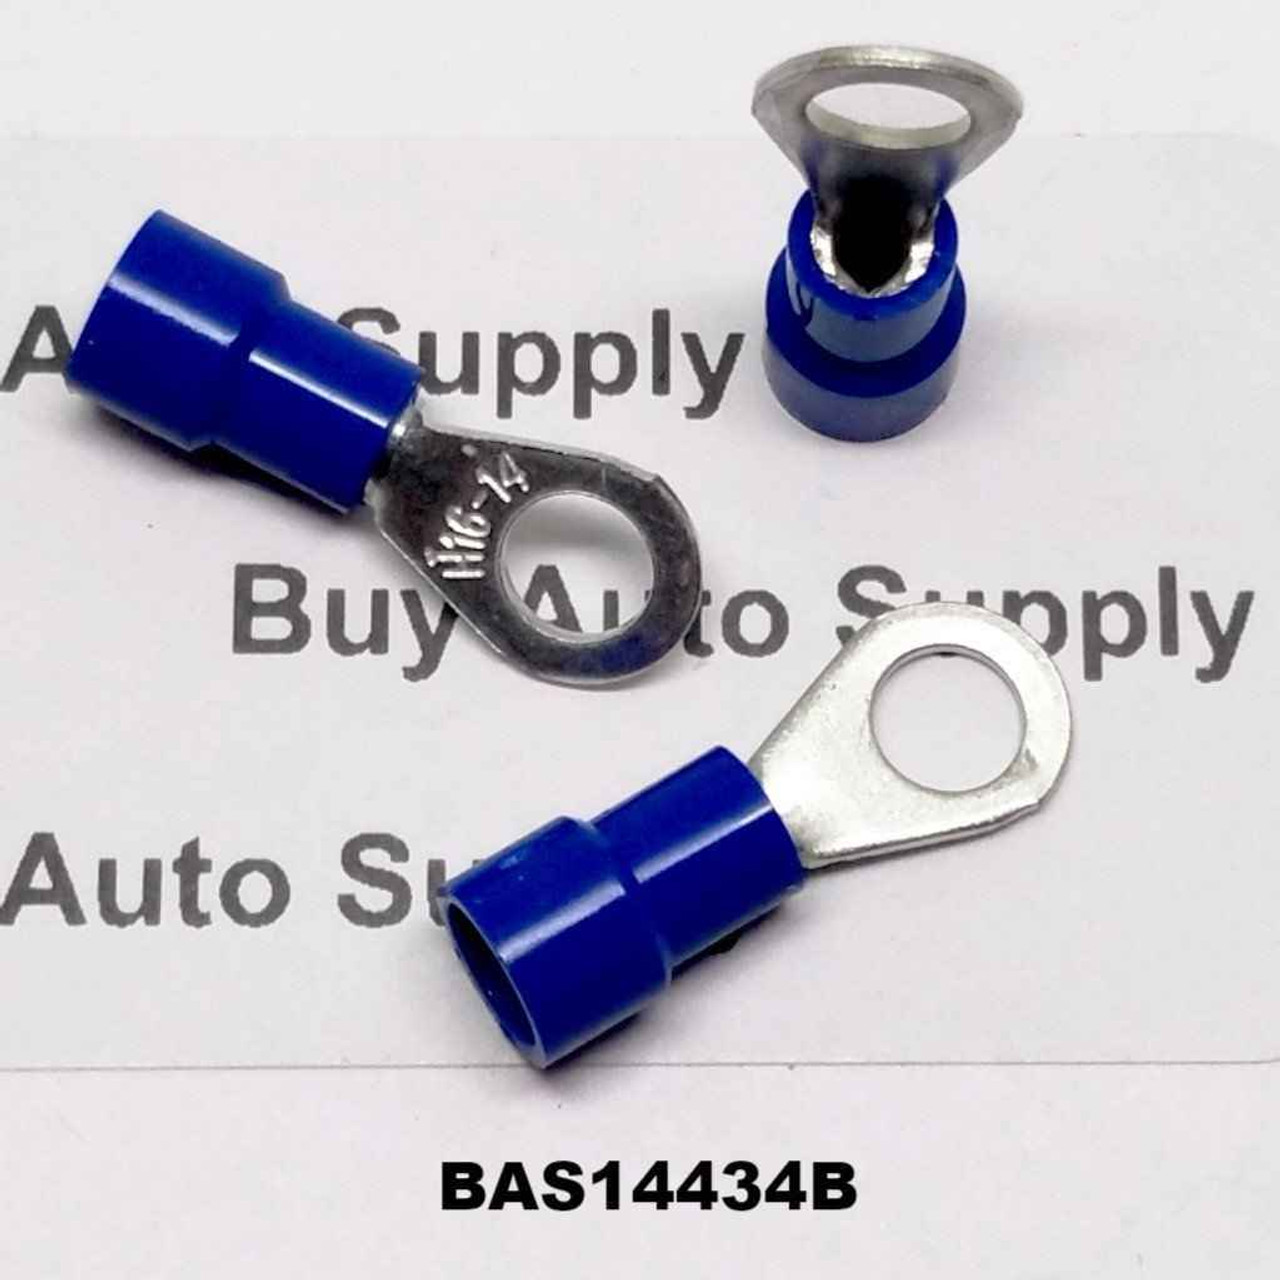 BAS14458B - Blue Nylon Ring Connector 16-14 (1/2 Stud) 100 Count